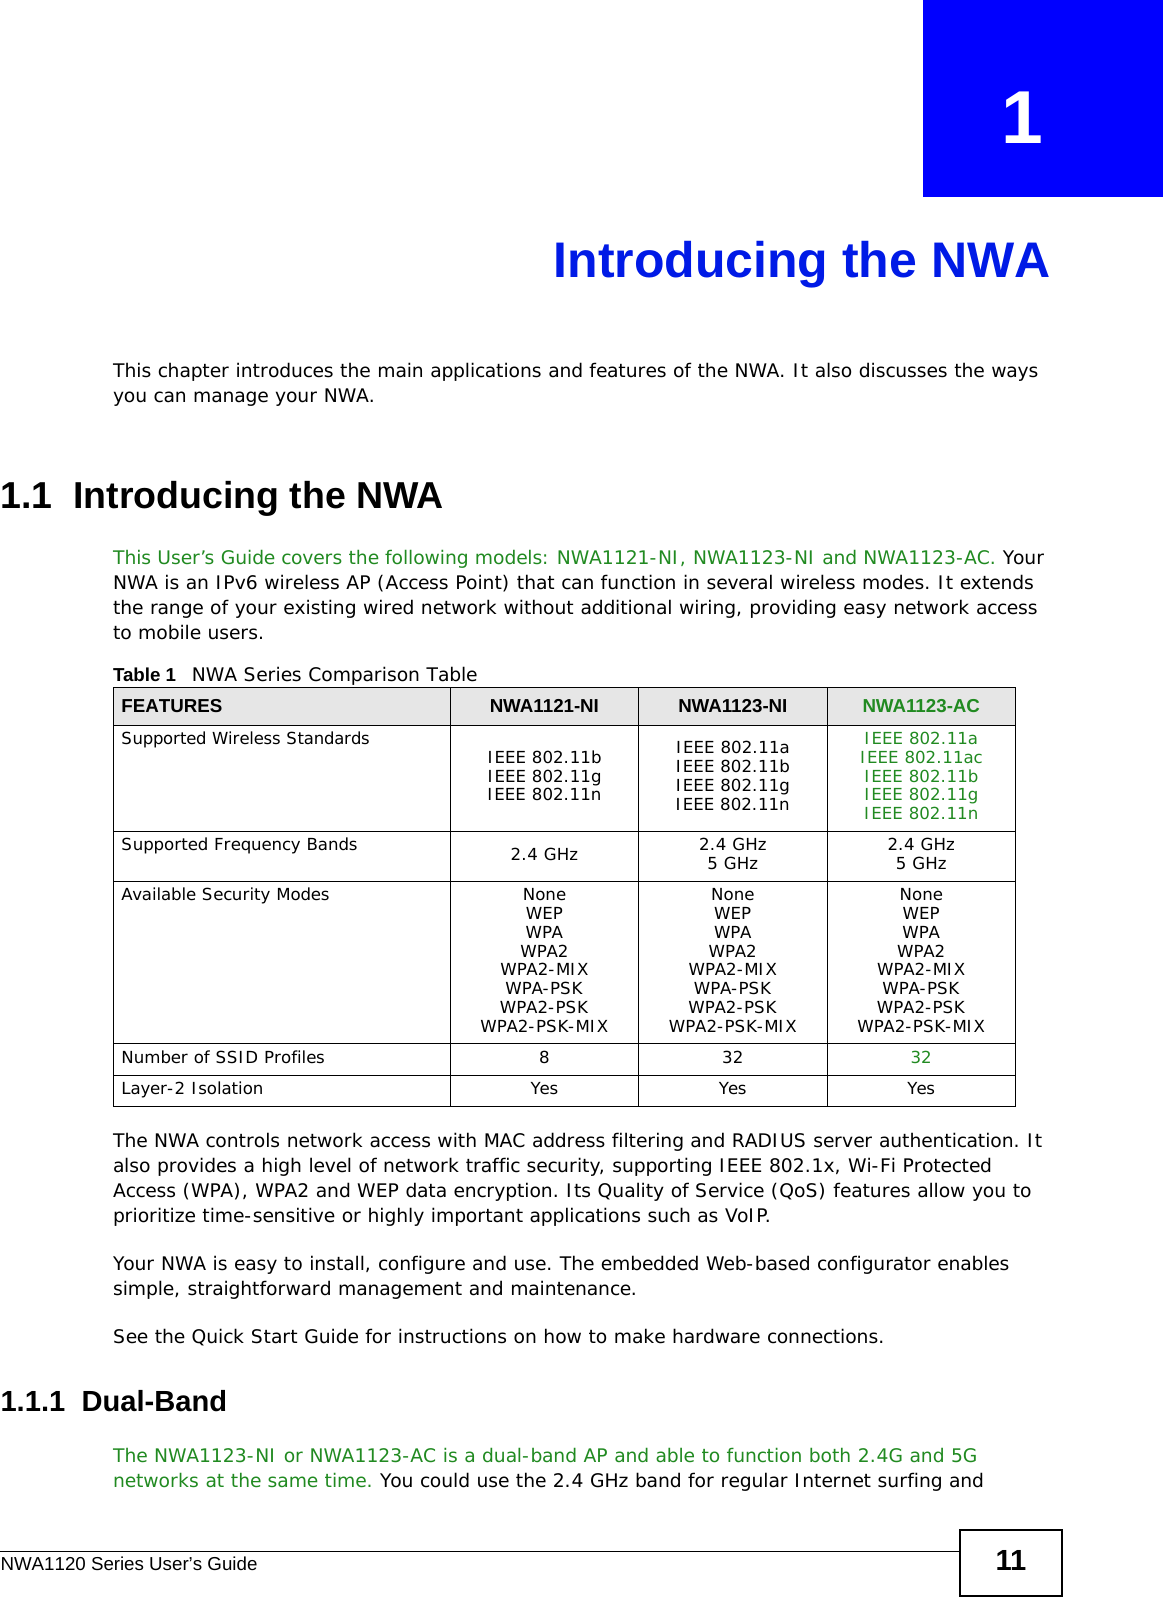 NWA1120 Series User’s Guide 11CHAPTER   1Introducing the NWAThis chapter introduces the main applications and features of the NWA. It also discusses the ways you can manage your NWA.1.1  Introducing the NWA This User’s Guide covers the following models: NWA1121-NI, NWA1123-NI and NWA1123-AC. Your NWA is an IPv6 wireless AP (Access Point) that can function in several wireless modes. It extends the range of your existing wired network without additional wiring, providing easy network access to mobile users.  The NWA controls network access with MAC address filtering and RADIUS server authentication. It also provides a high level of network traffic security, supporting IEEE 802.1x, Wi-Fi Protected Access (WPA), WPA2 and WEP data encryption. Its Quality of Service (QoS) features allow you to prioritize time-sensitive or highly important applications such as VoIP.Your NWA is easy to install, configure and use. The embedded Web-based configurator enables simple, straightforward management and maintenance.See the Quick Start Guide for instructions on how to make hardware connections.1.1.1  Dual-BandThe NWA1123-NI or NWA1123-AC is a dual-band AP and able to function both 2.4G and 5G networks at the same time. You could use the 2.4 GHz band for regular Internet surfing and Table 1   NWA Series Comparison TableFEATURES NWA1121-NI NWA1123-NI NWA1123-ACSupported Wireless StandardsIEEE 802.11bIEEE 802.11gIEEE 802.11nIEEE 802.11aIEEE 802.11bIEEE 802.11gIEEE 802.11nIEEE 802.11aIEEE 802.11acIEEE 802.11bIEEE 802.11gIEEE 802.11nSupported Frequency Bands 2.4 GHz 2.4 GHz5 GHz 2.4 GHz5 GHzAvailable Security Modes NoneWEPWPAWPA2WPA2-MIXWPA-PSKWPA2-PSKWPA2-PSK-MIXNoneWEPWPAWPA2WPA2-MIXWPA-PSKWPA2-PSKWPA2-PSK-MIXNoneWEPWPAWPA2WPA2-MIXWPA-PSKWPA2-PSKWPA2-PSK-MIXNumber of SSID Profiles 8 32 32Layer-2 Isolation Yes Yes Yes